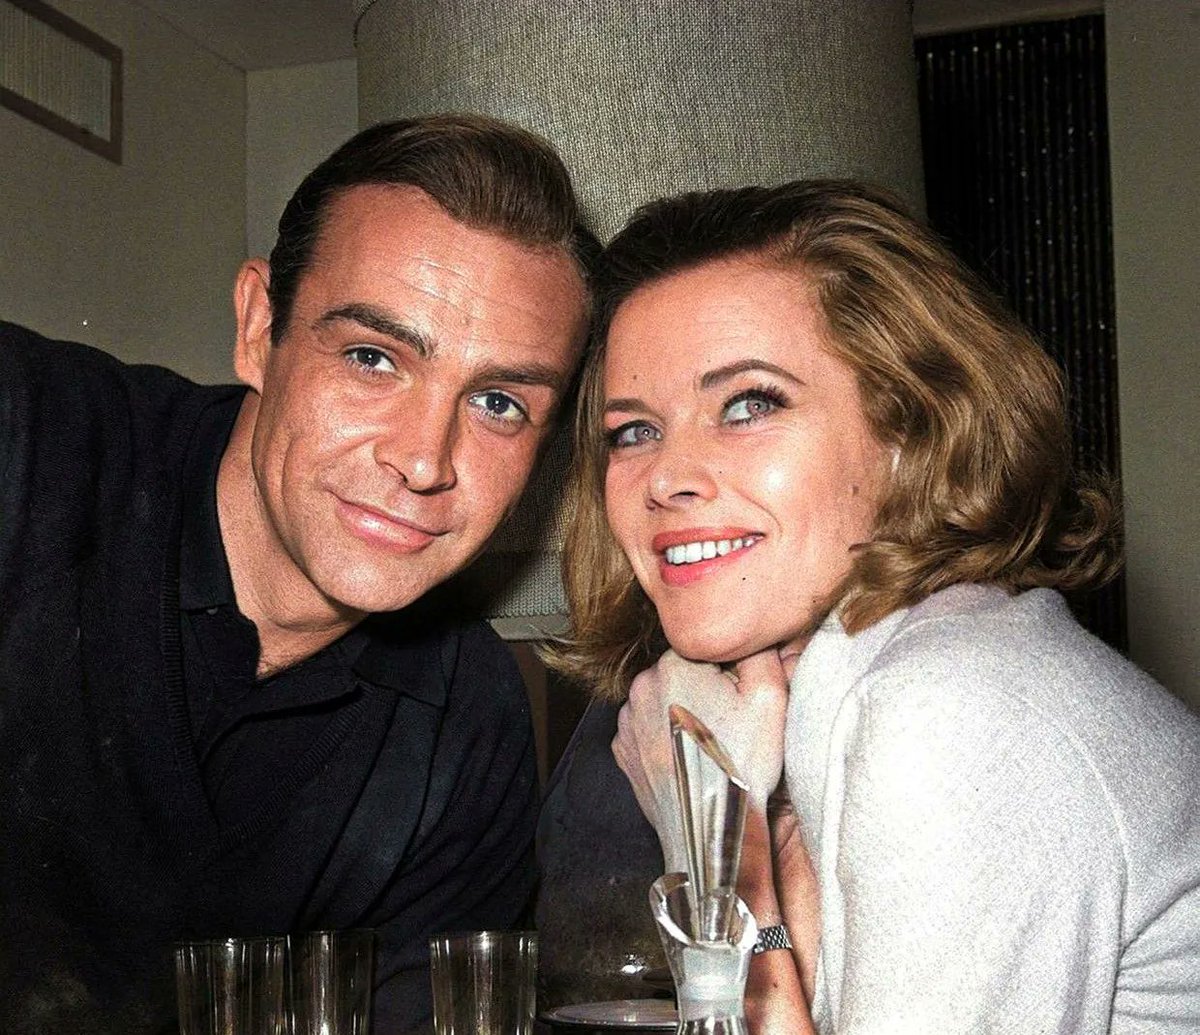 Sean Connery and Honor Blackman, who played Pussy Galore, promoting the film Goldfinger in 1964. #seanconnery #honorblackman #bond #jamesbond #goldfinger #pussygalore #sixties